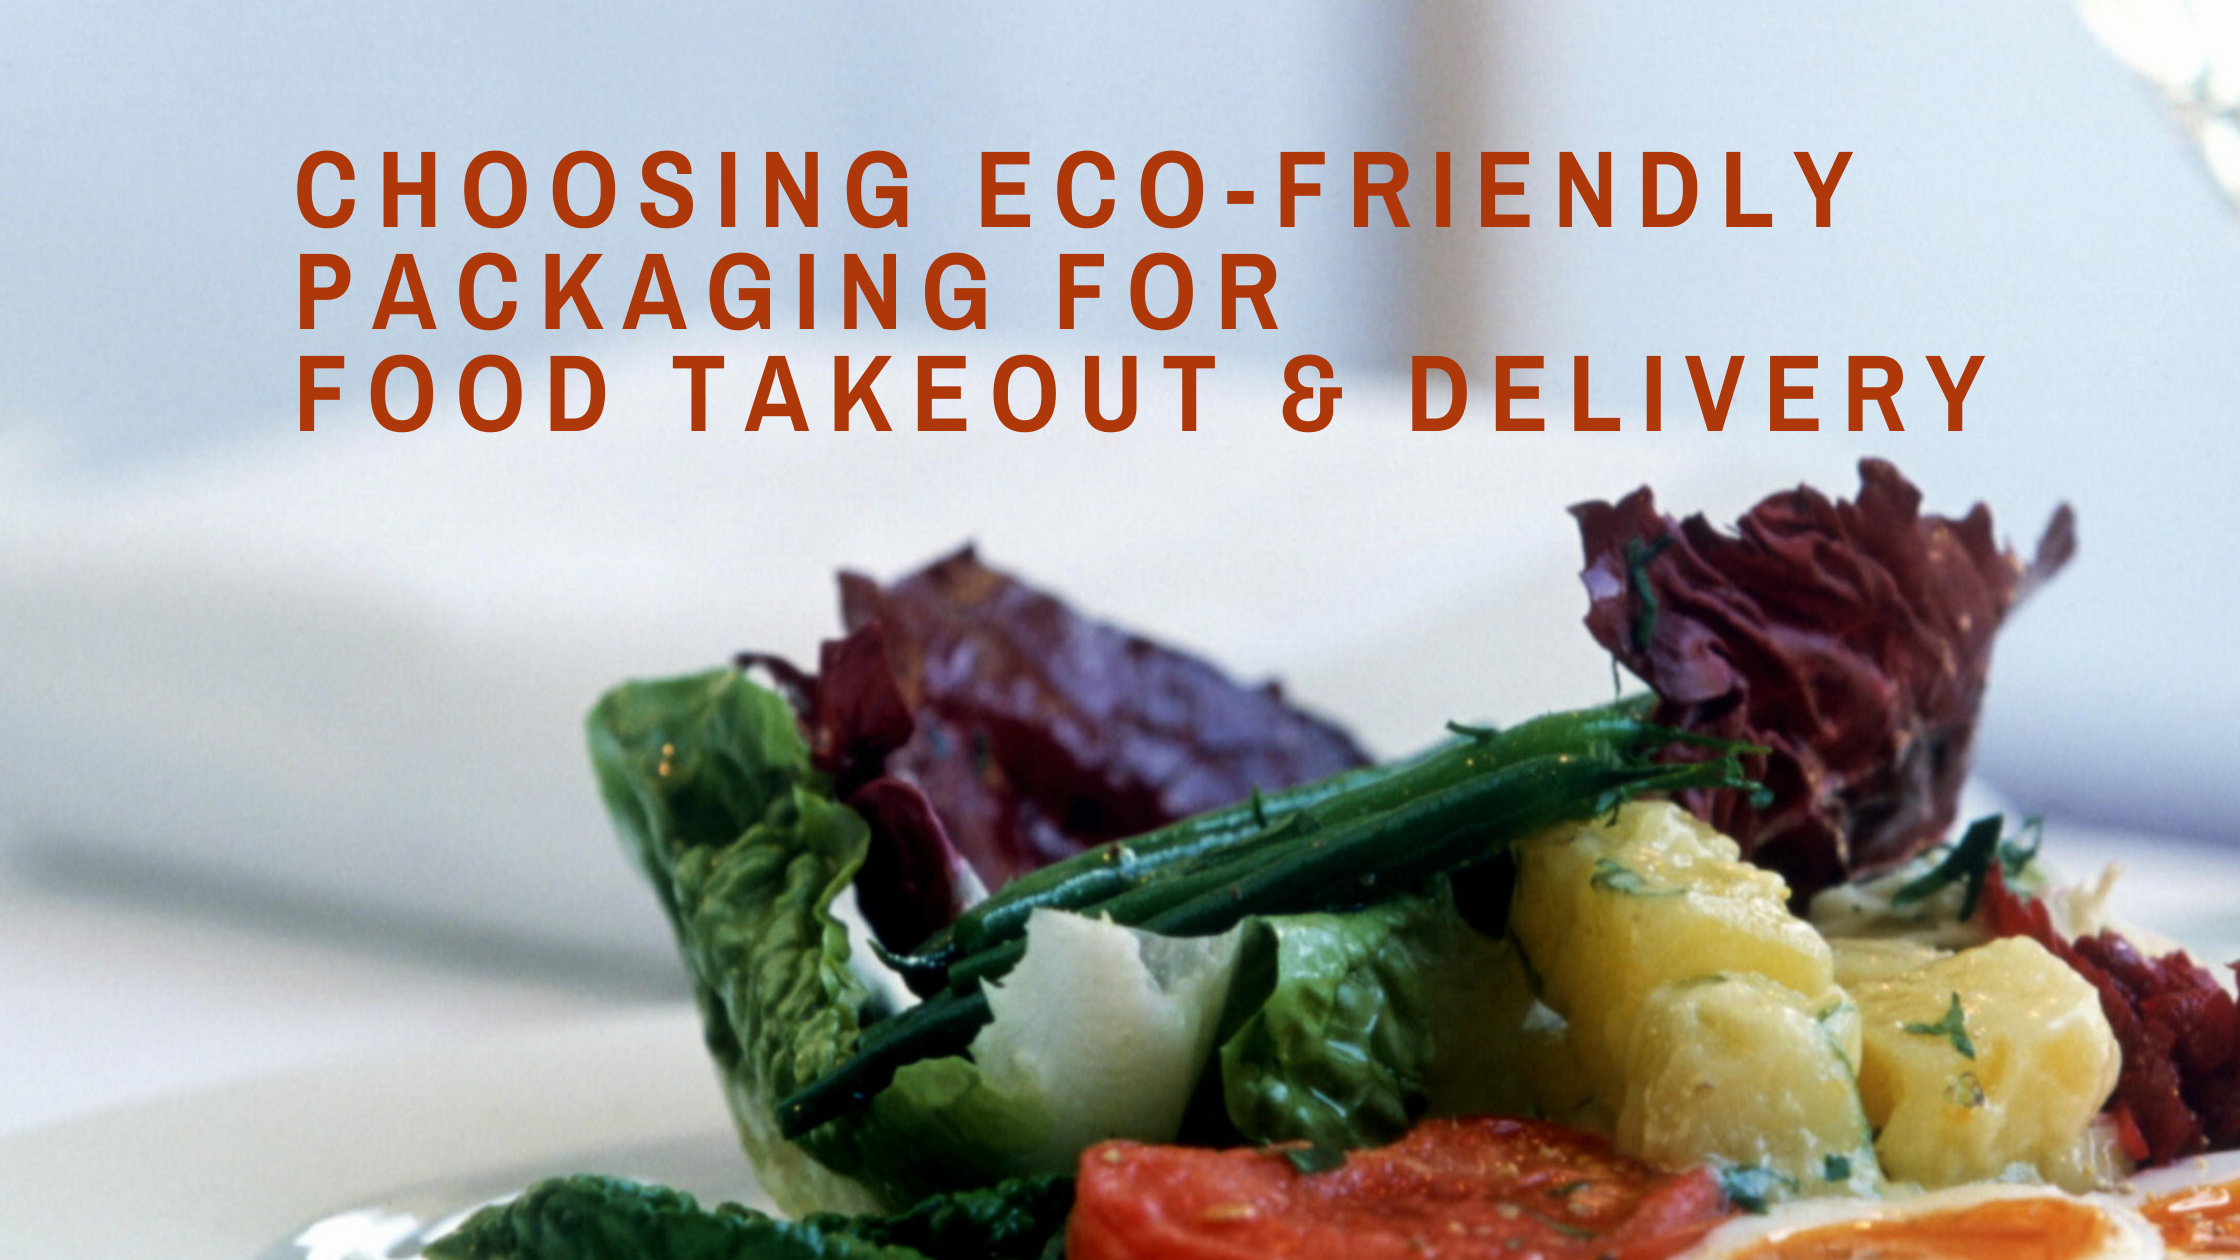 Eco-Friendly Packaging for Food Takeout & Delivery